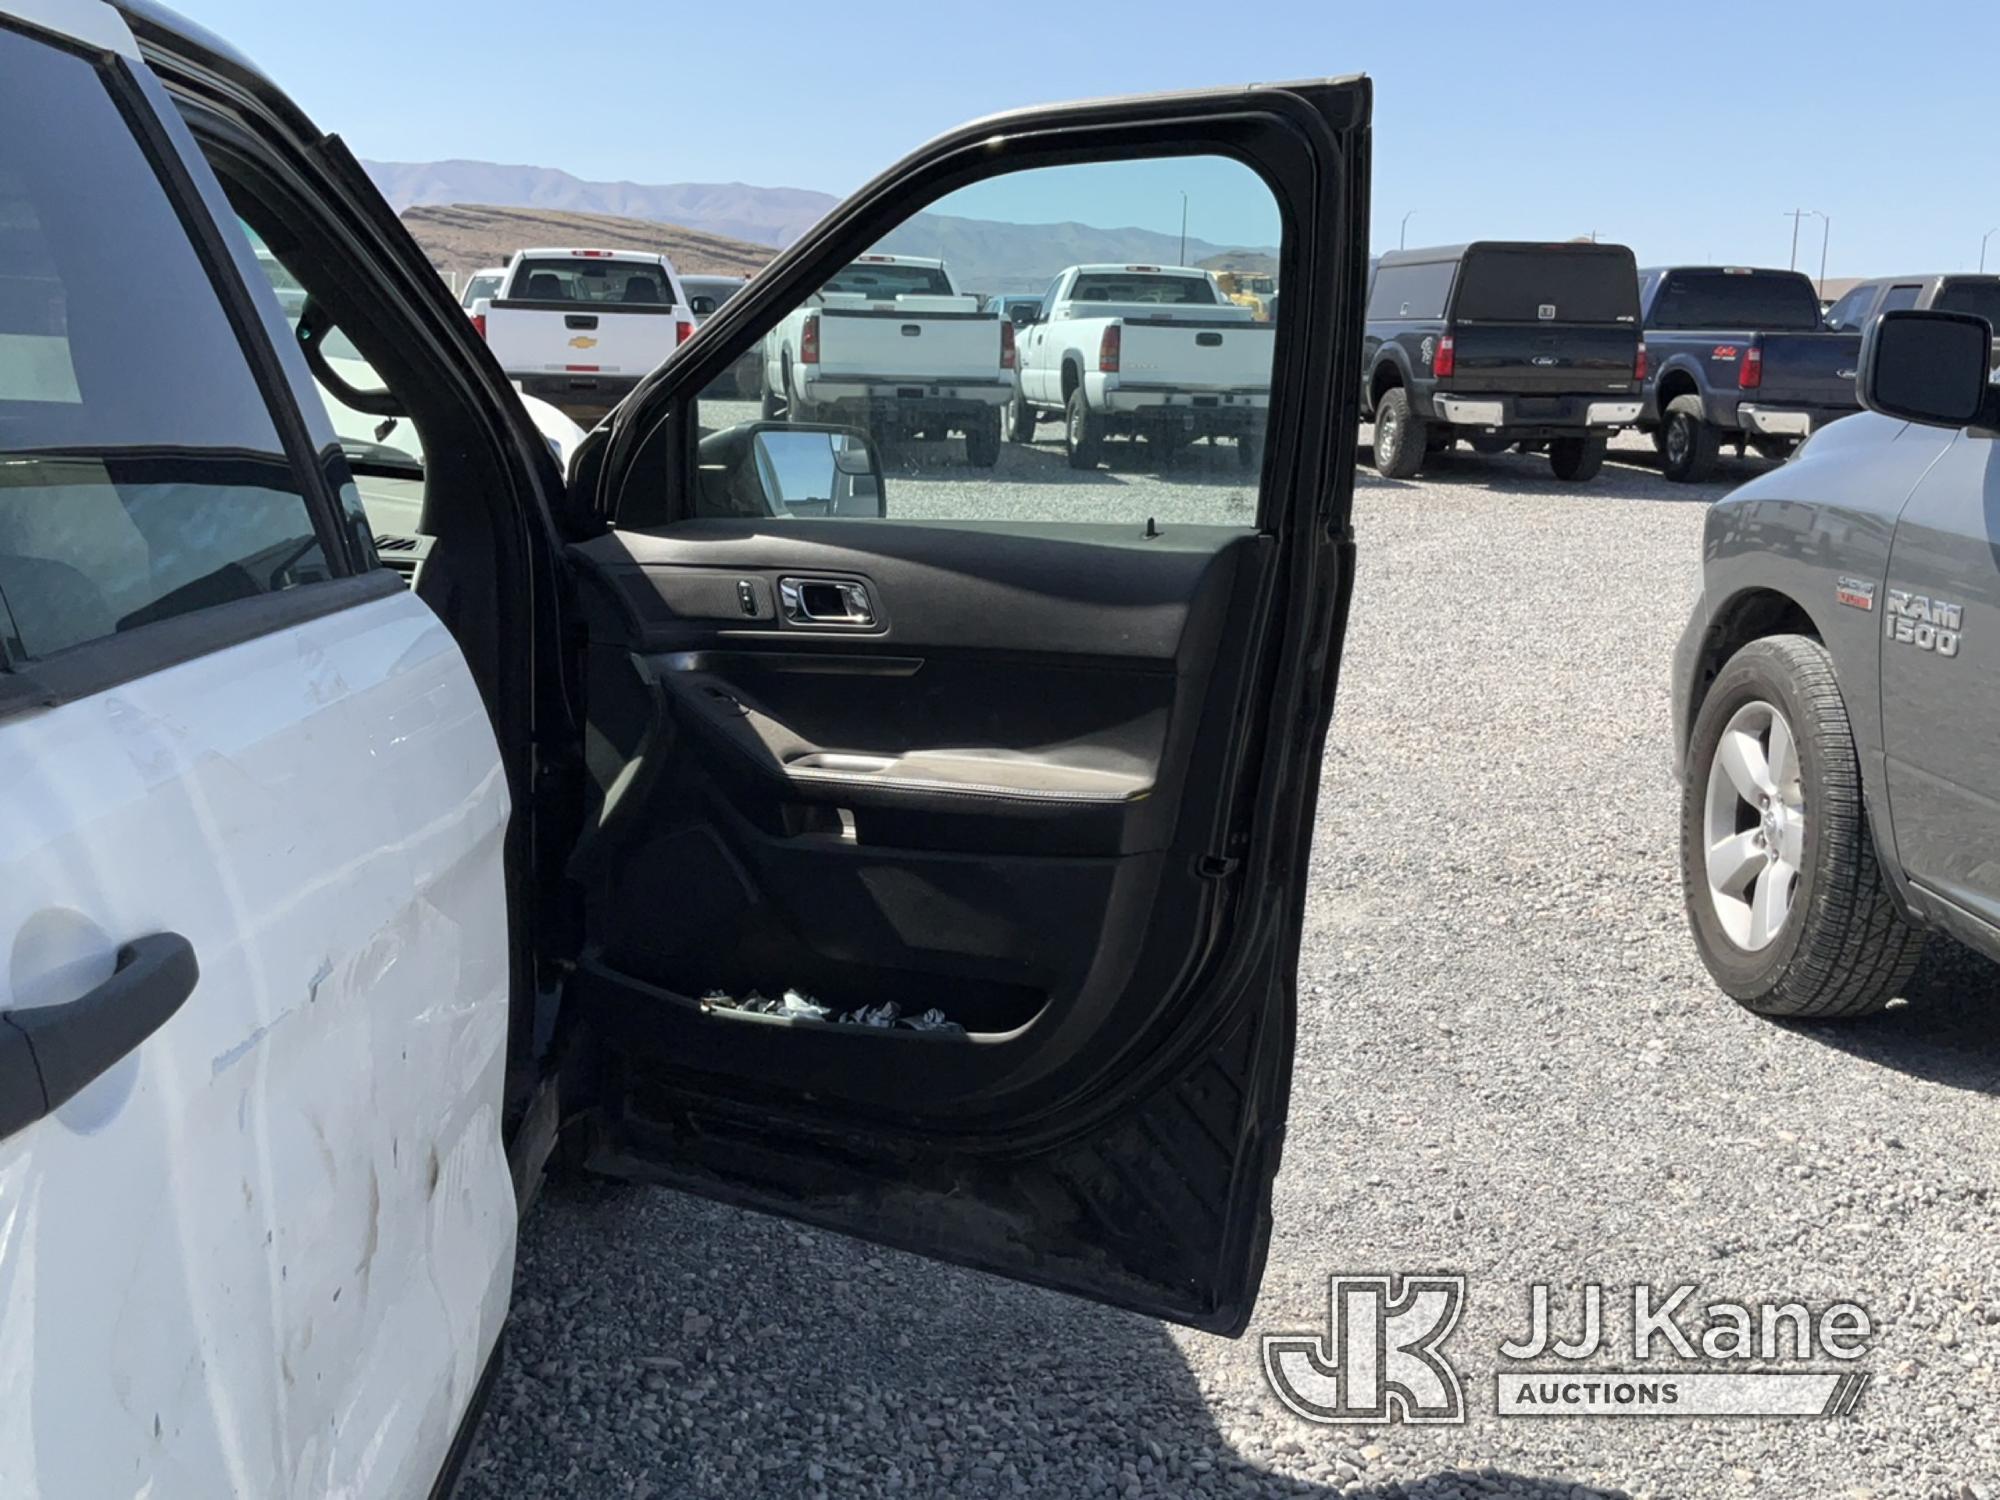 (Las Vegas, NV) 2015 Ford Explorer AWD Police Interceptor Towed In, Wrecked, Missing Parts Turns Ove